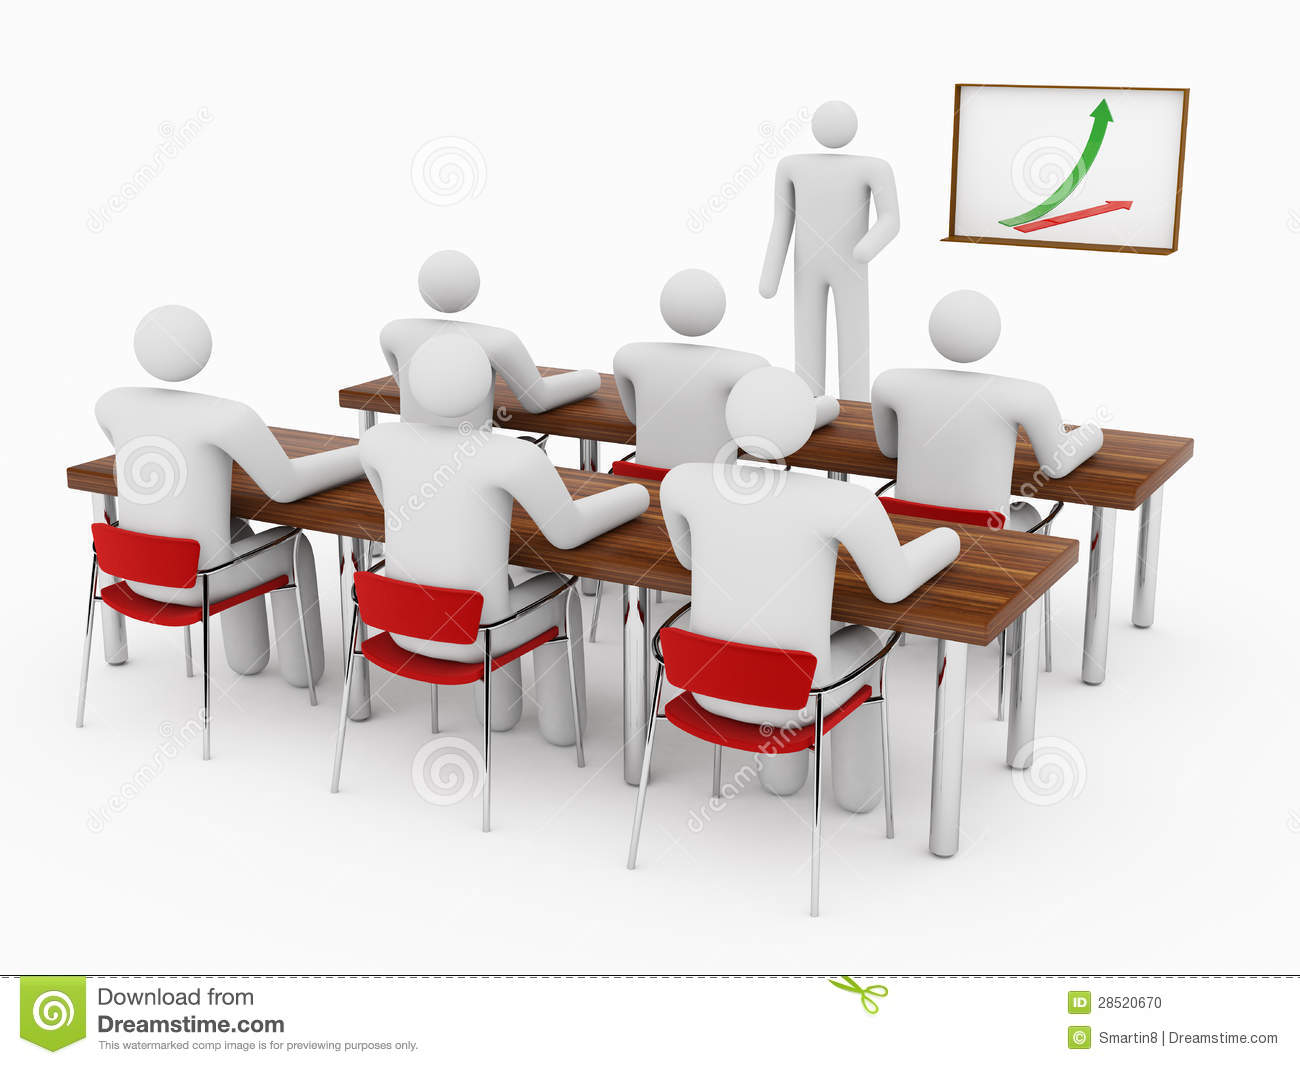 3d People In Classroom Stock Photo   Image  28520670